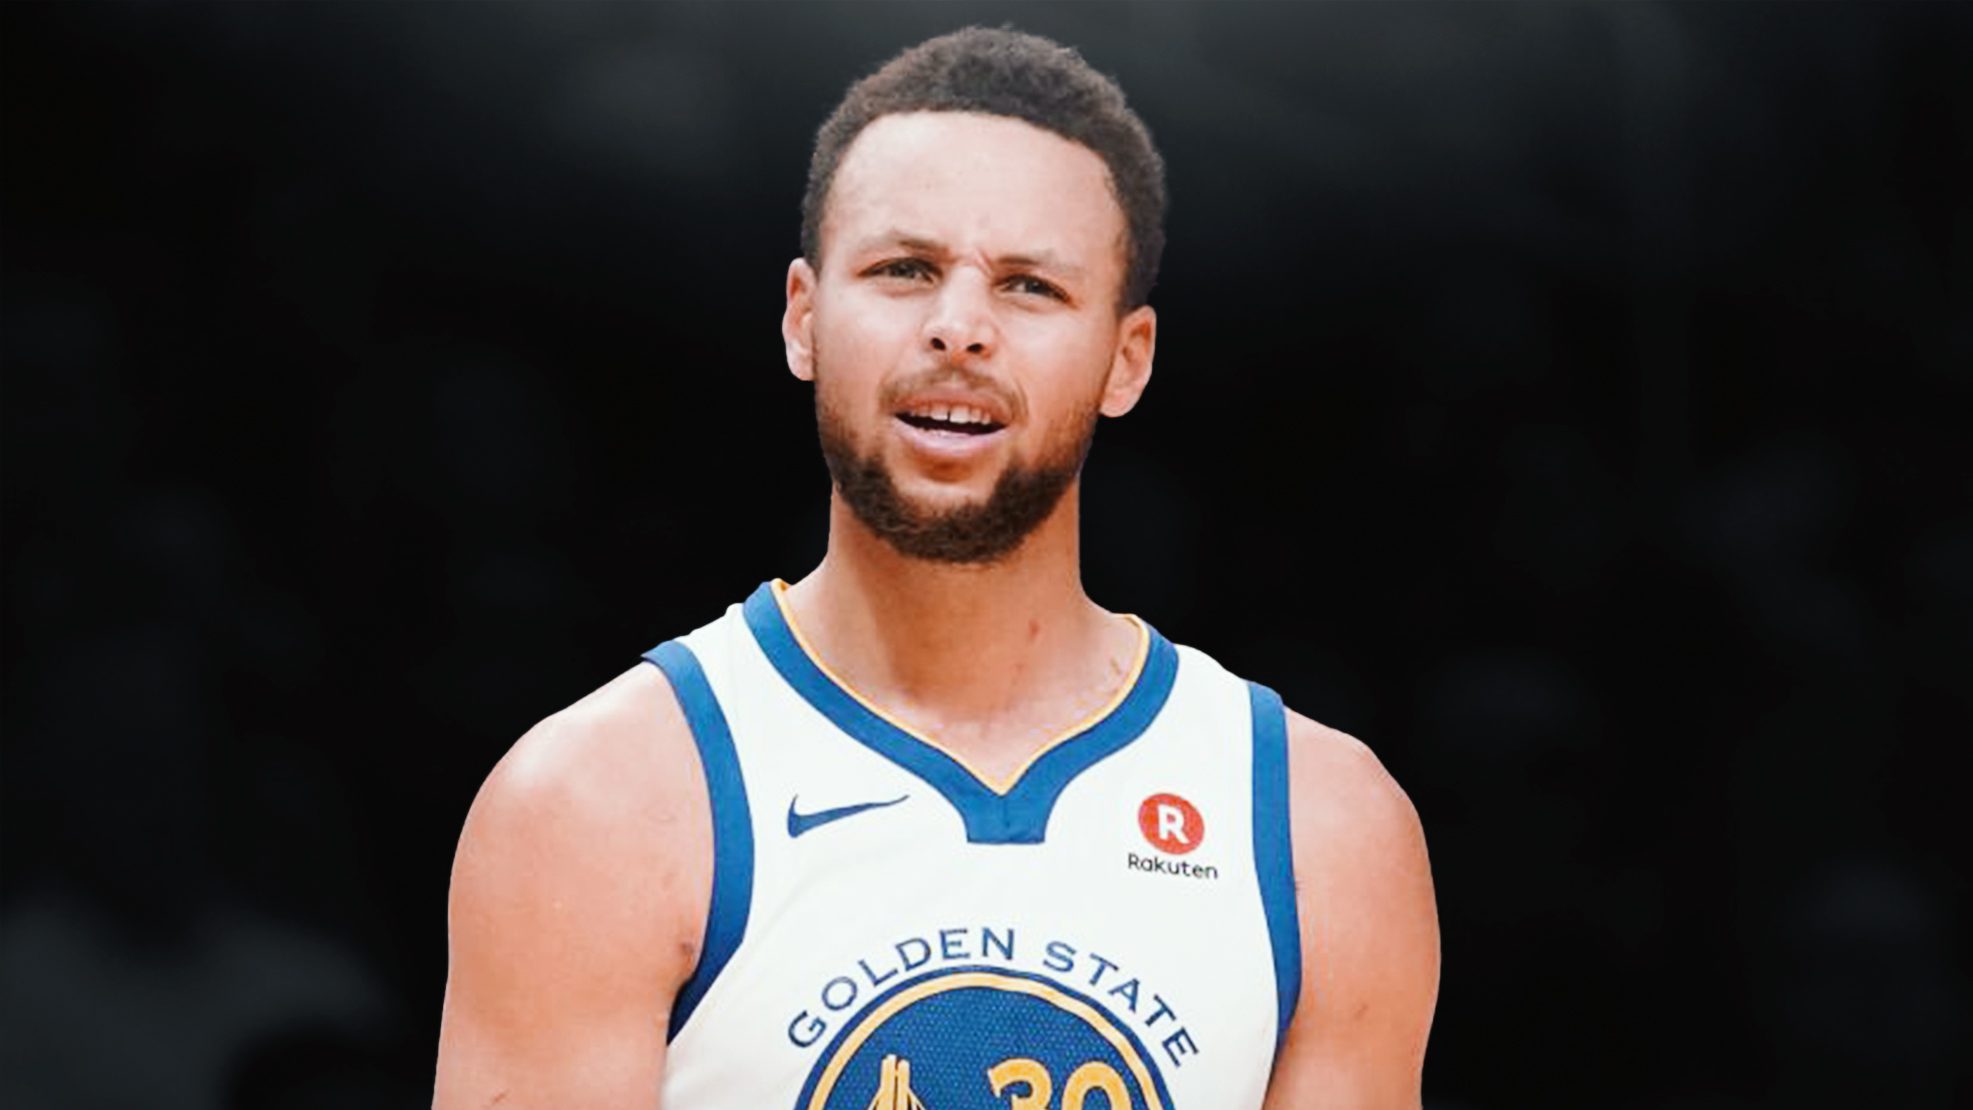 NBA Star Steph Curry Agrees to Become an Ambassador for FTX